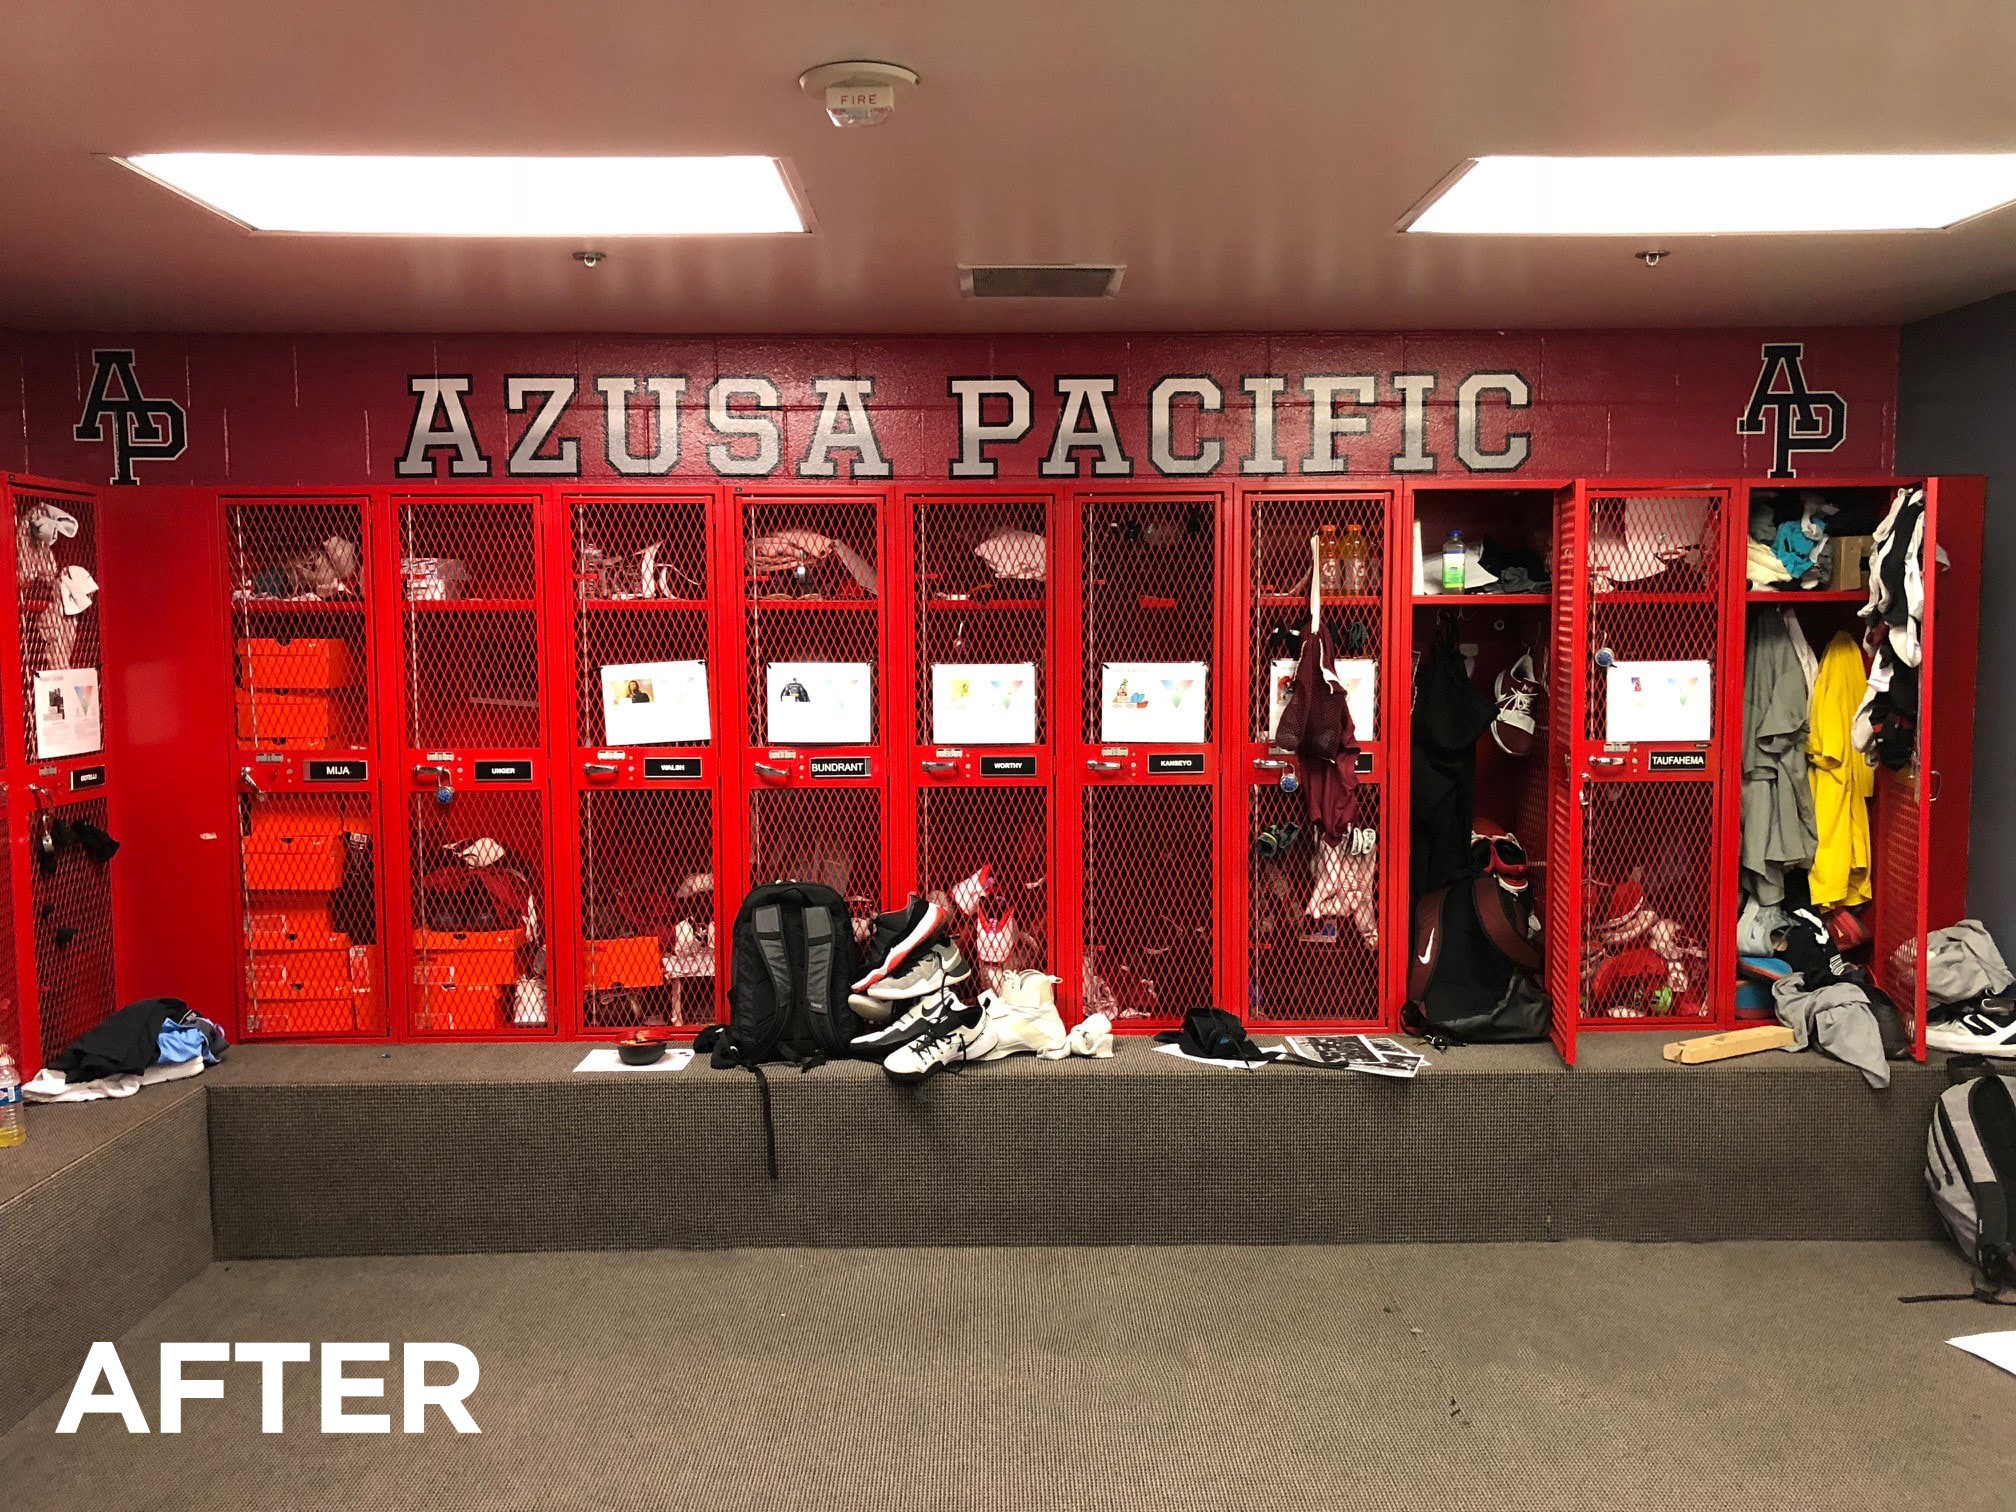 Azusa Pacific University Wall Murals AP Above Lockers After